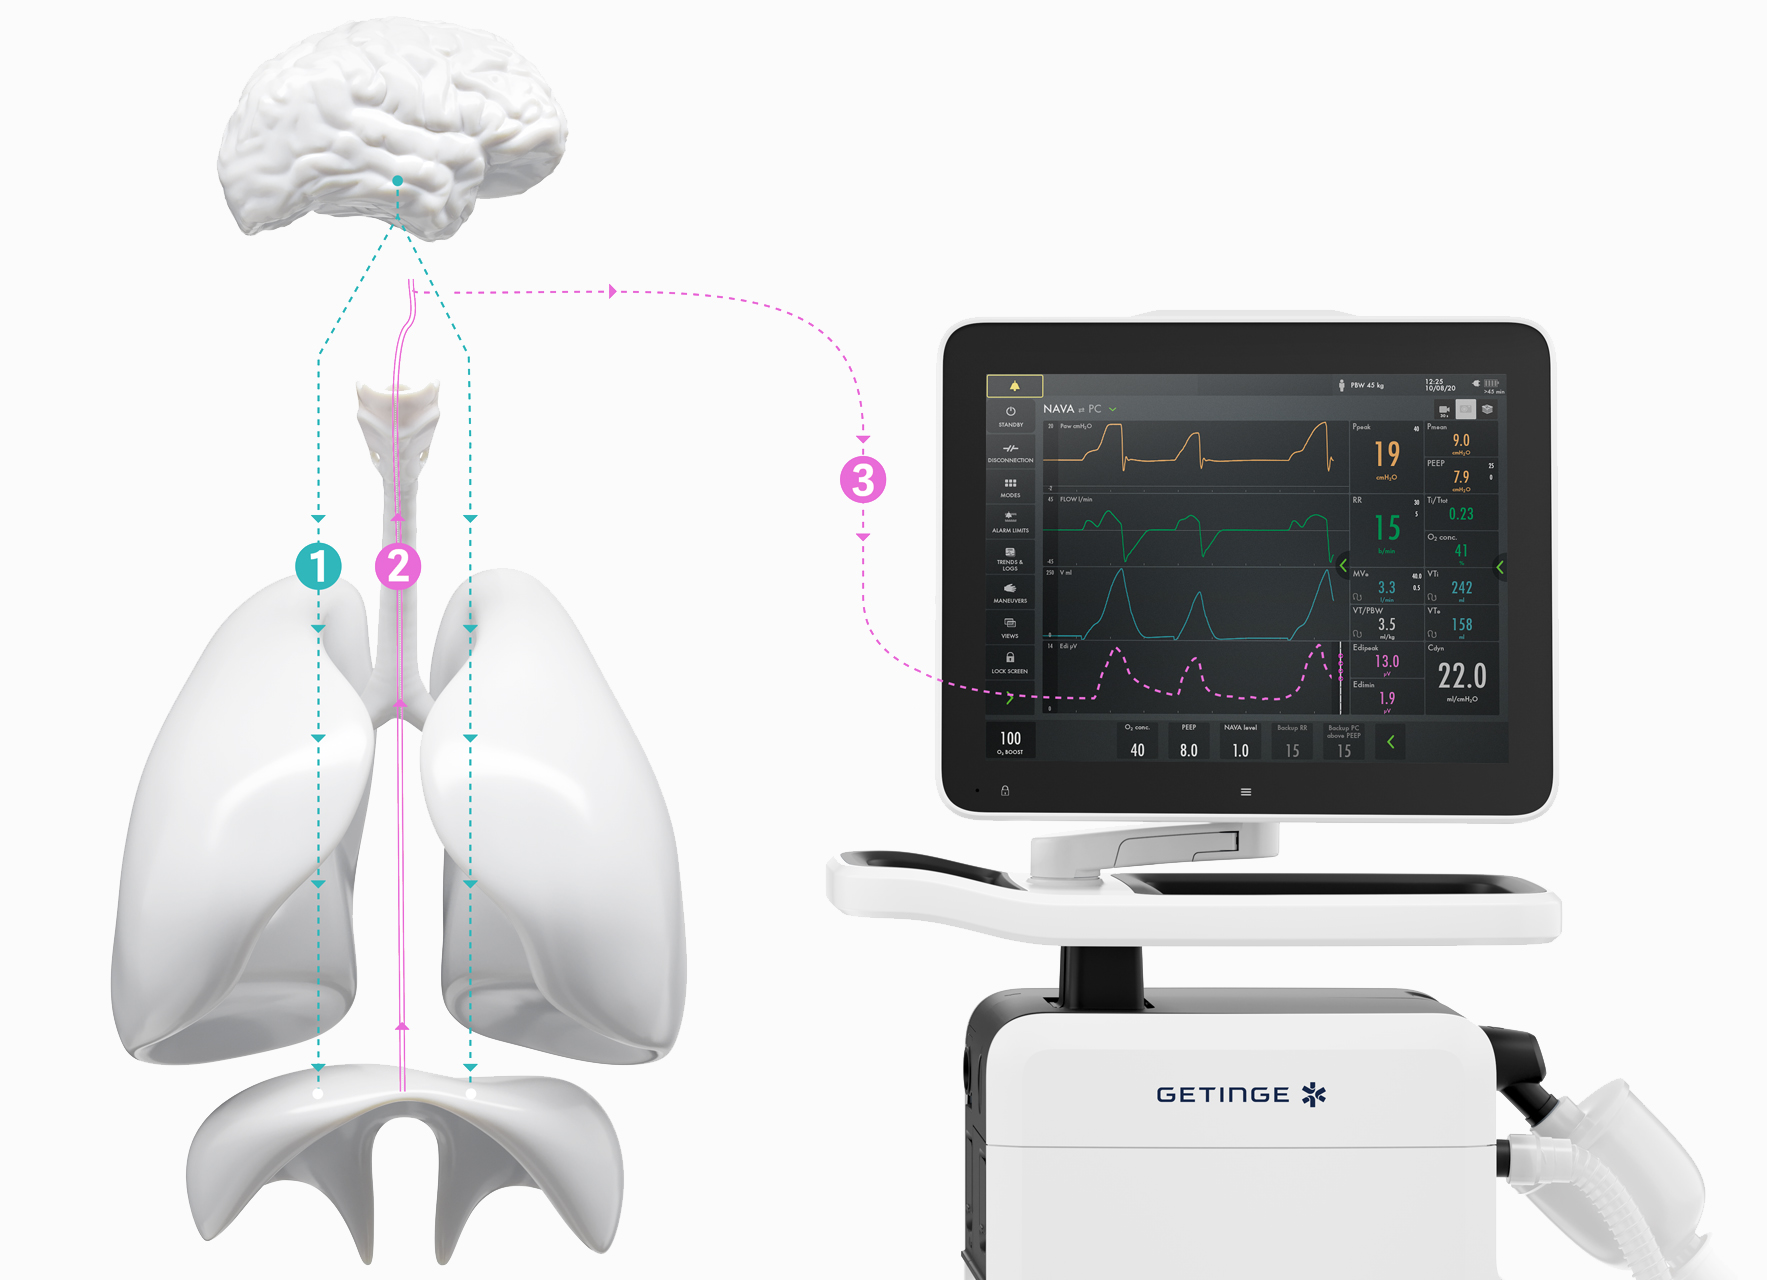 Learn how NAVA neurally adjusted ventilator assist delivers a more personalized level of ventilation to your patient 